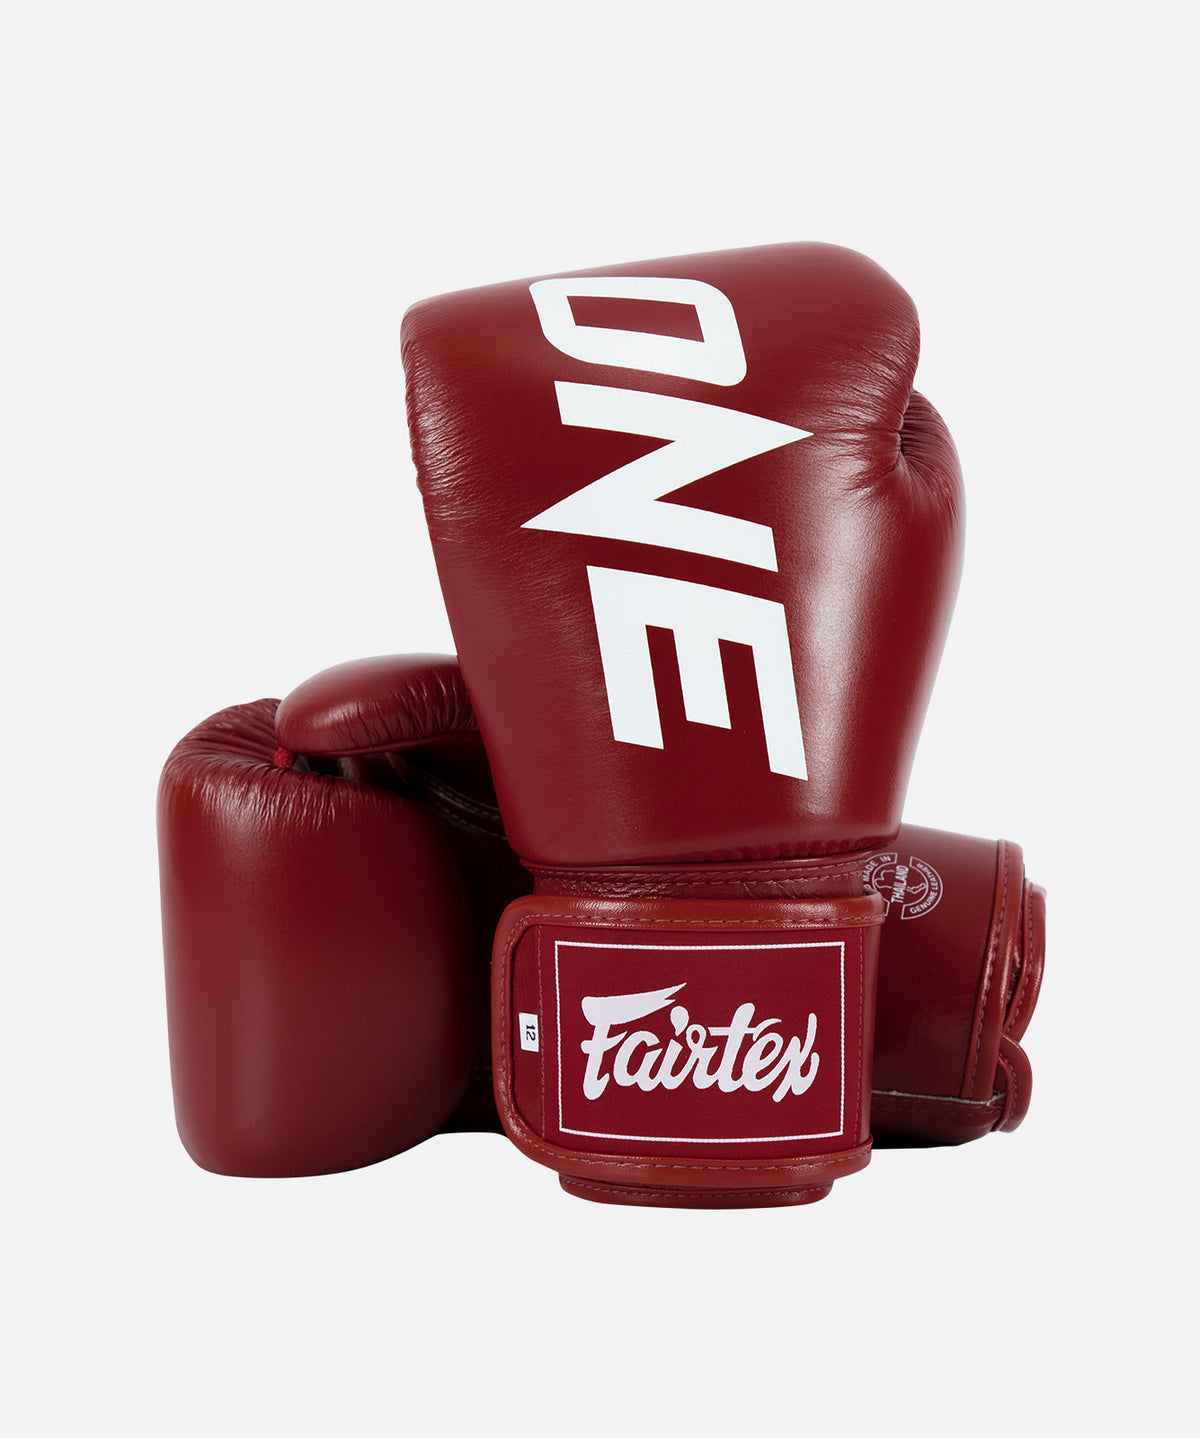 ONE x Fairtex Tight-Fit Boxing Glove (Red) ONE Championship